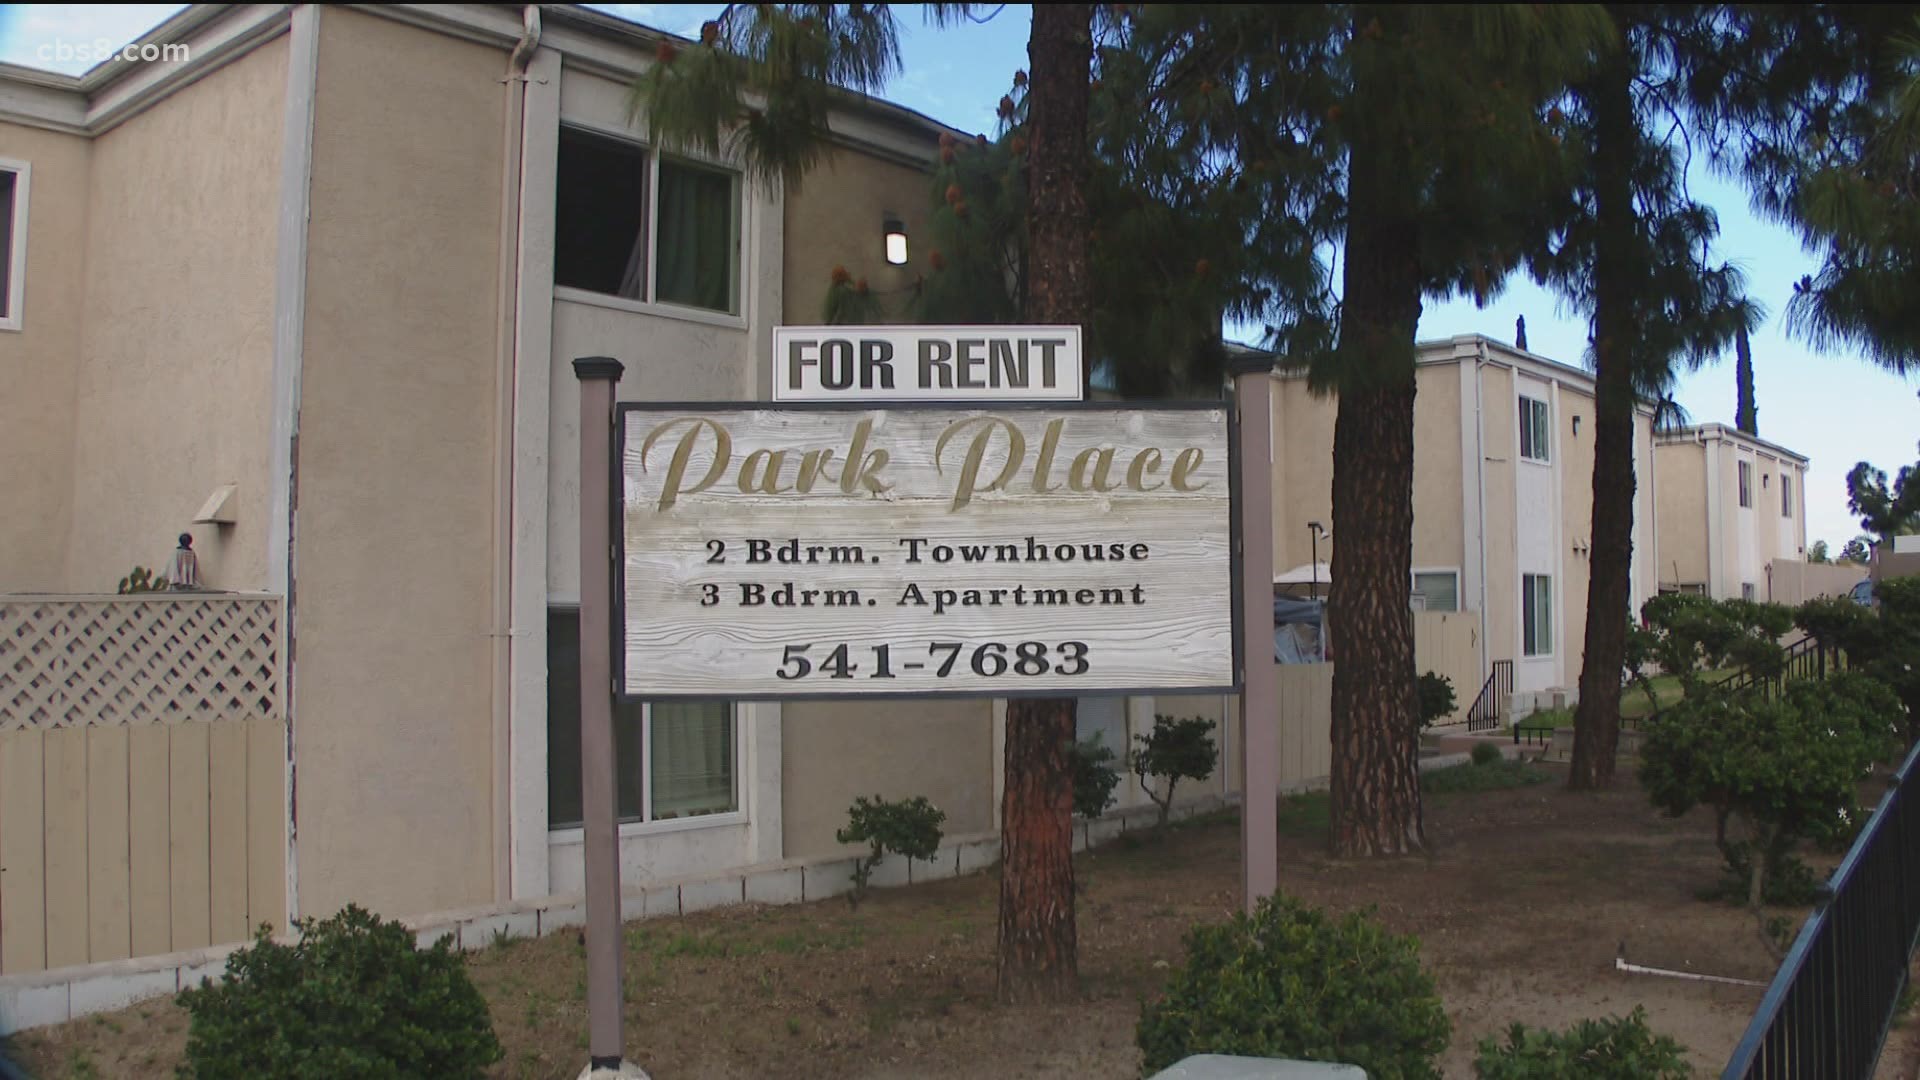 Under the ordinance, rent will not be completely forgiven for renters who are behind on payments; landlords will be paid 80% of what is owed from the state.